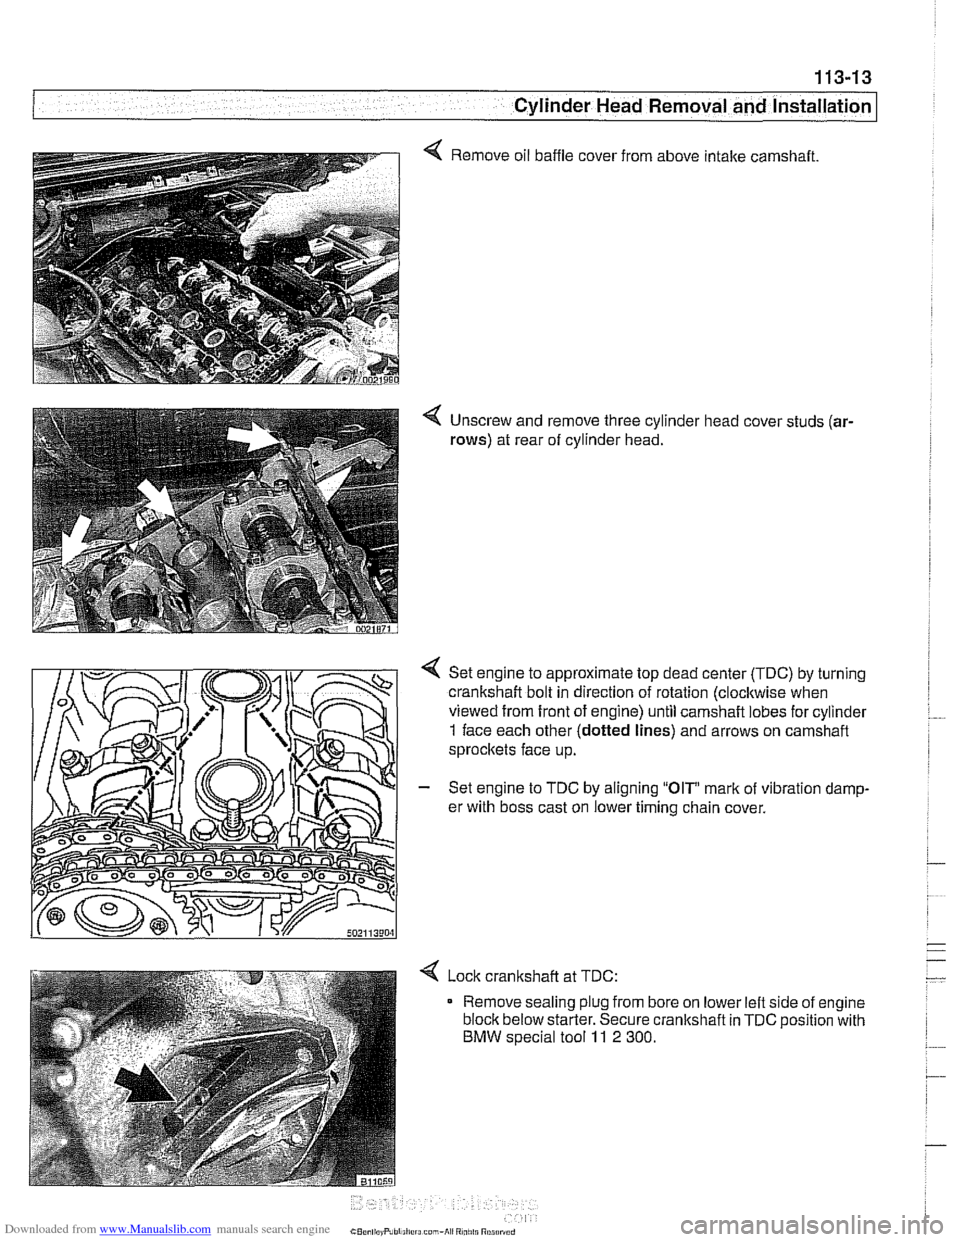 BMW 540i 1997 E39 Workshop Manual Downloaded from www.Manualslib.com manuals search engine 
- - , -. I Cylinder Head Removal and lnstallatio~ 
4 Remove oil baffle  cover from  above intake camshaft. 
4 Unscrew  and remove  three cylin